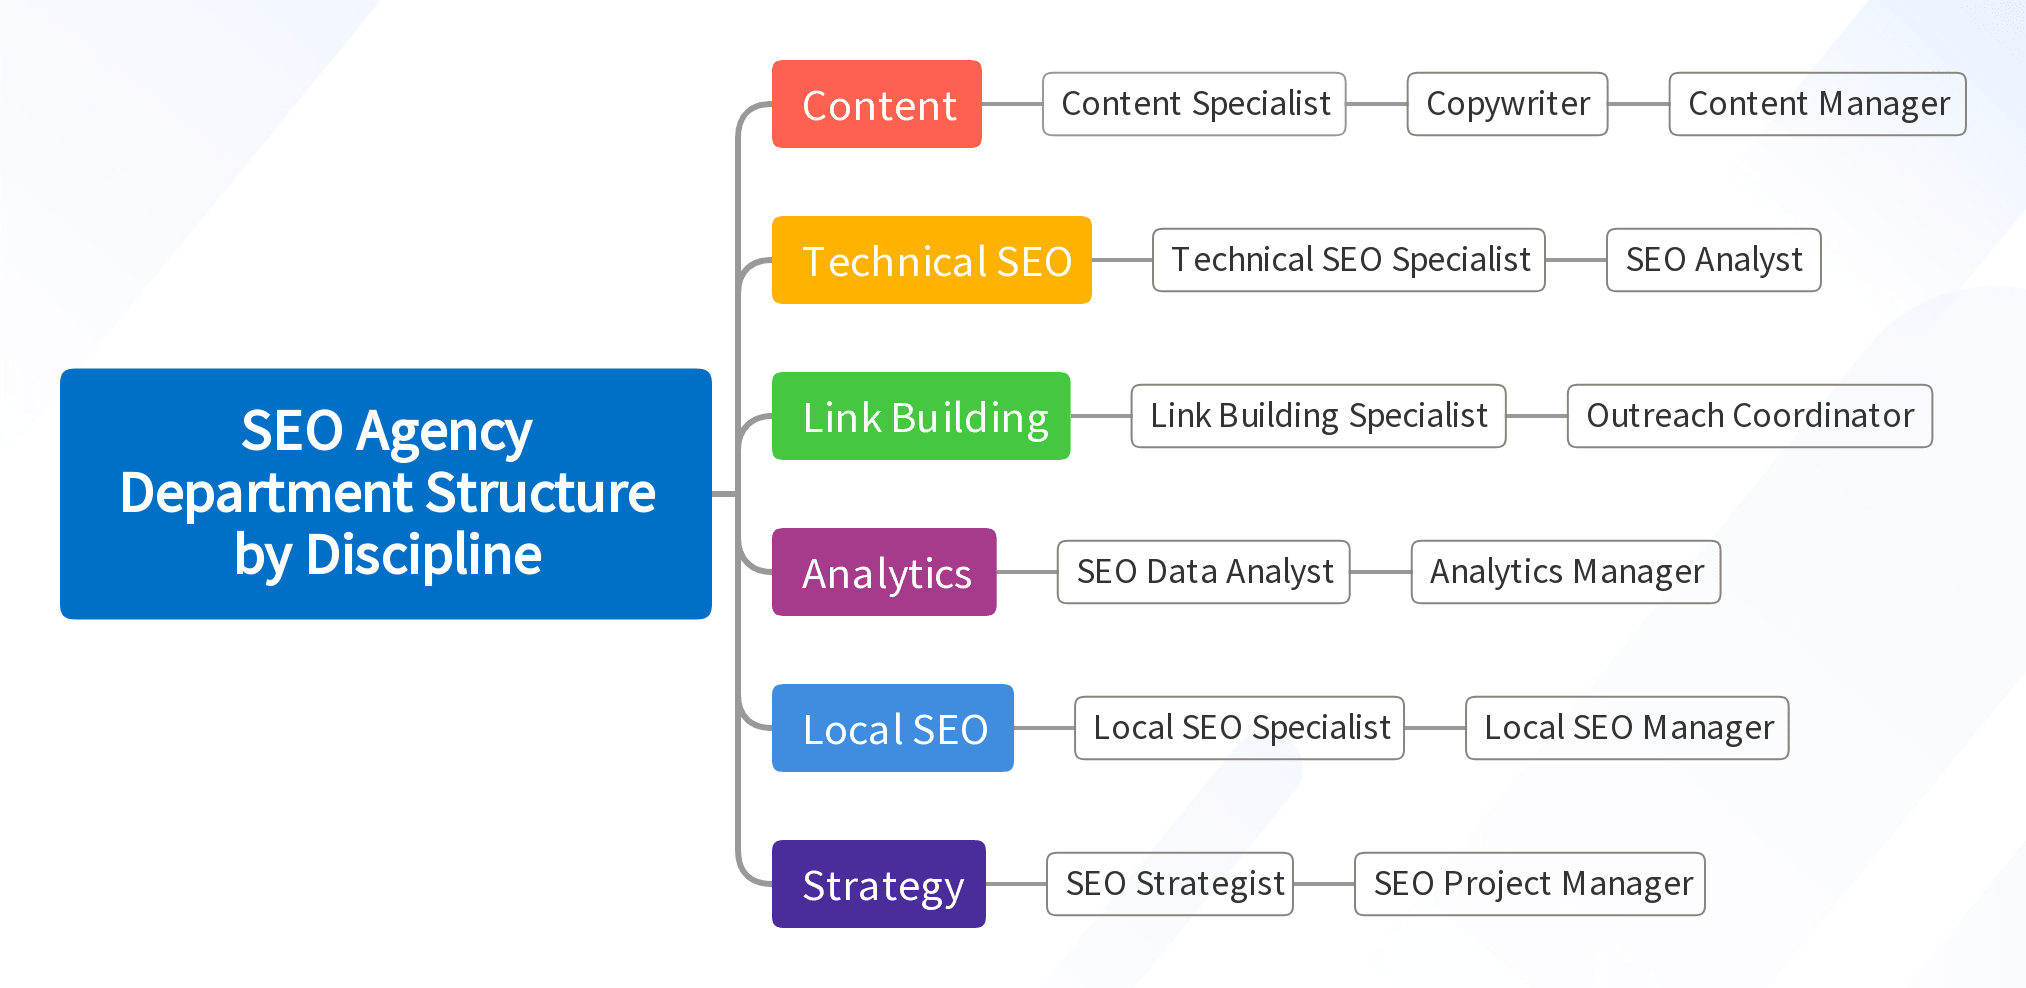 SEO Agency Department Structure by Discipline